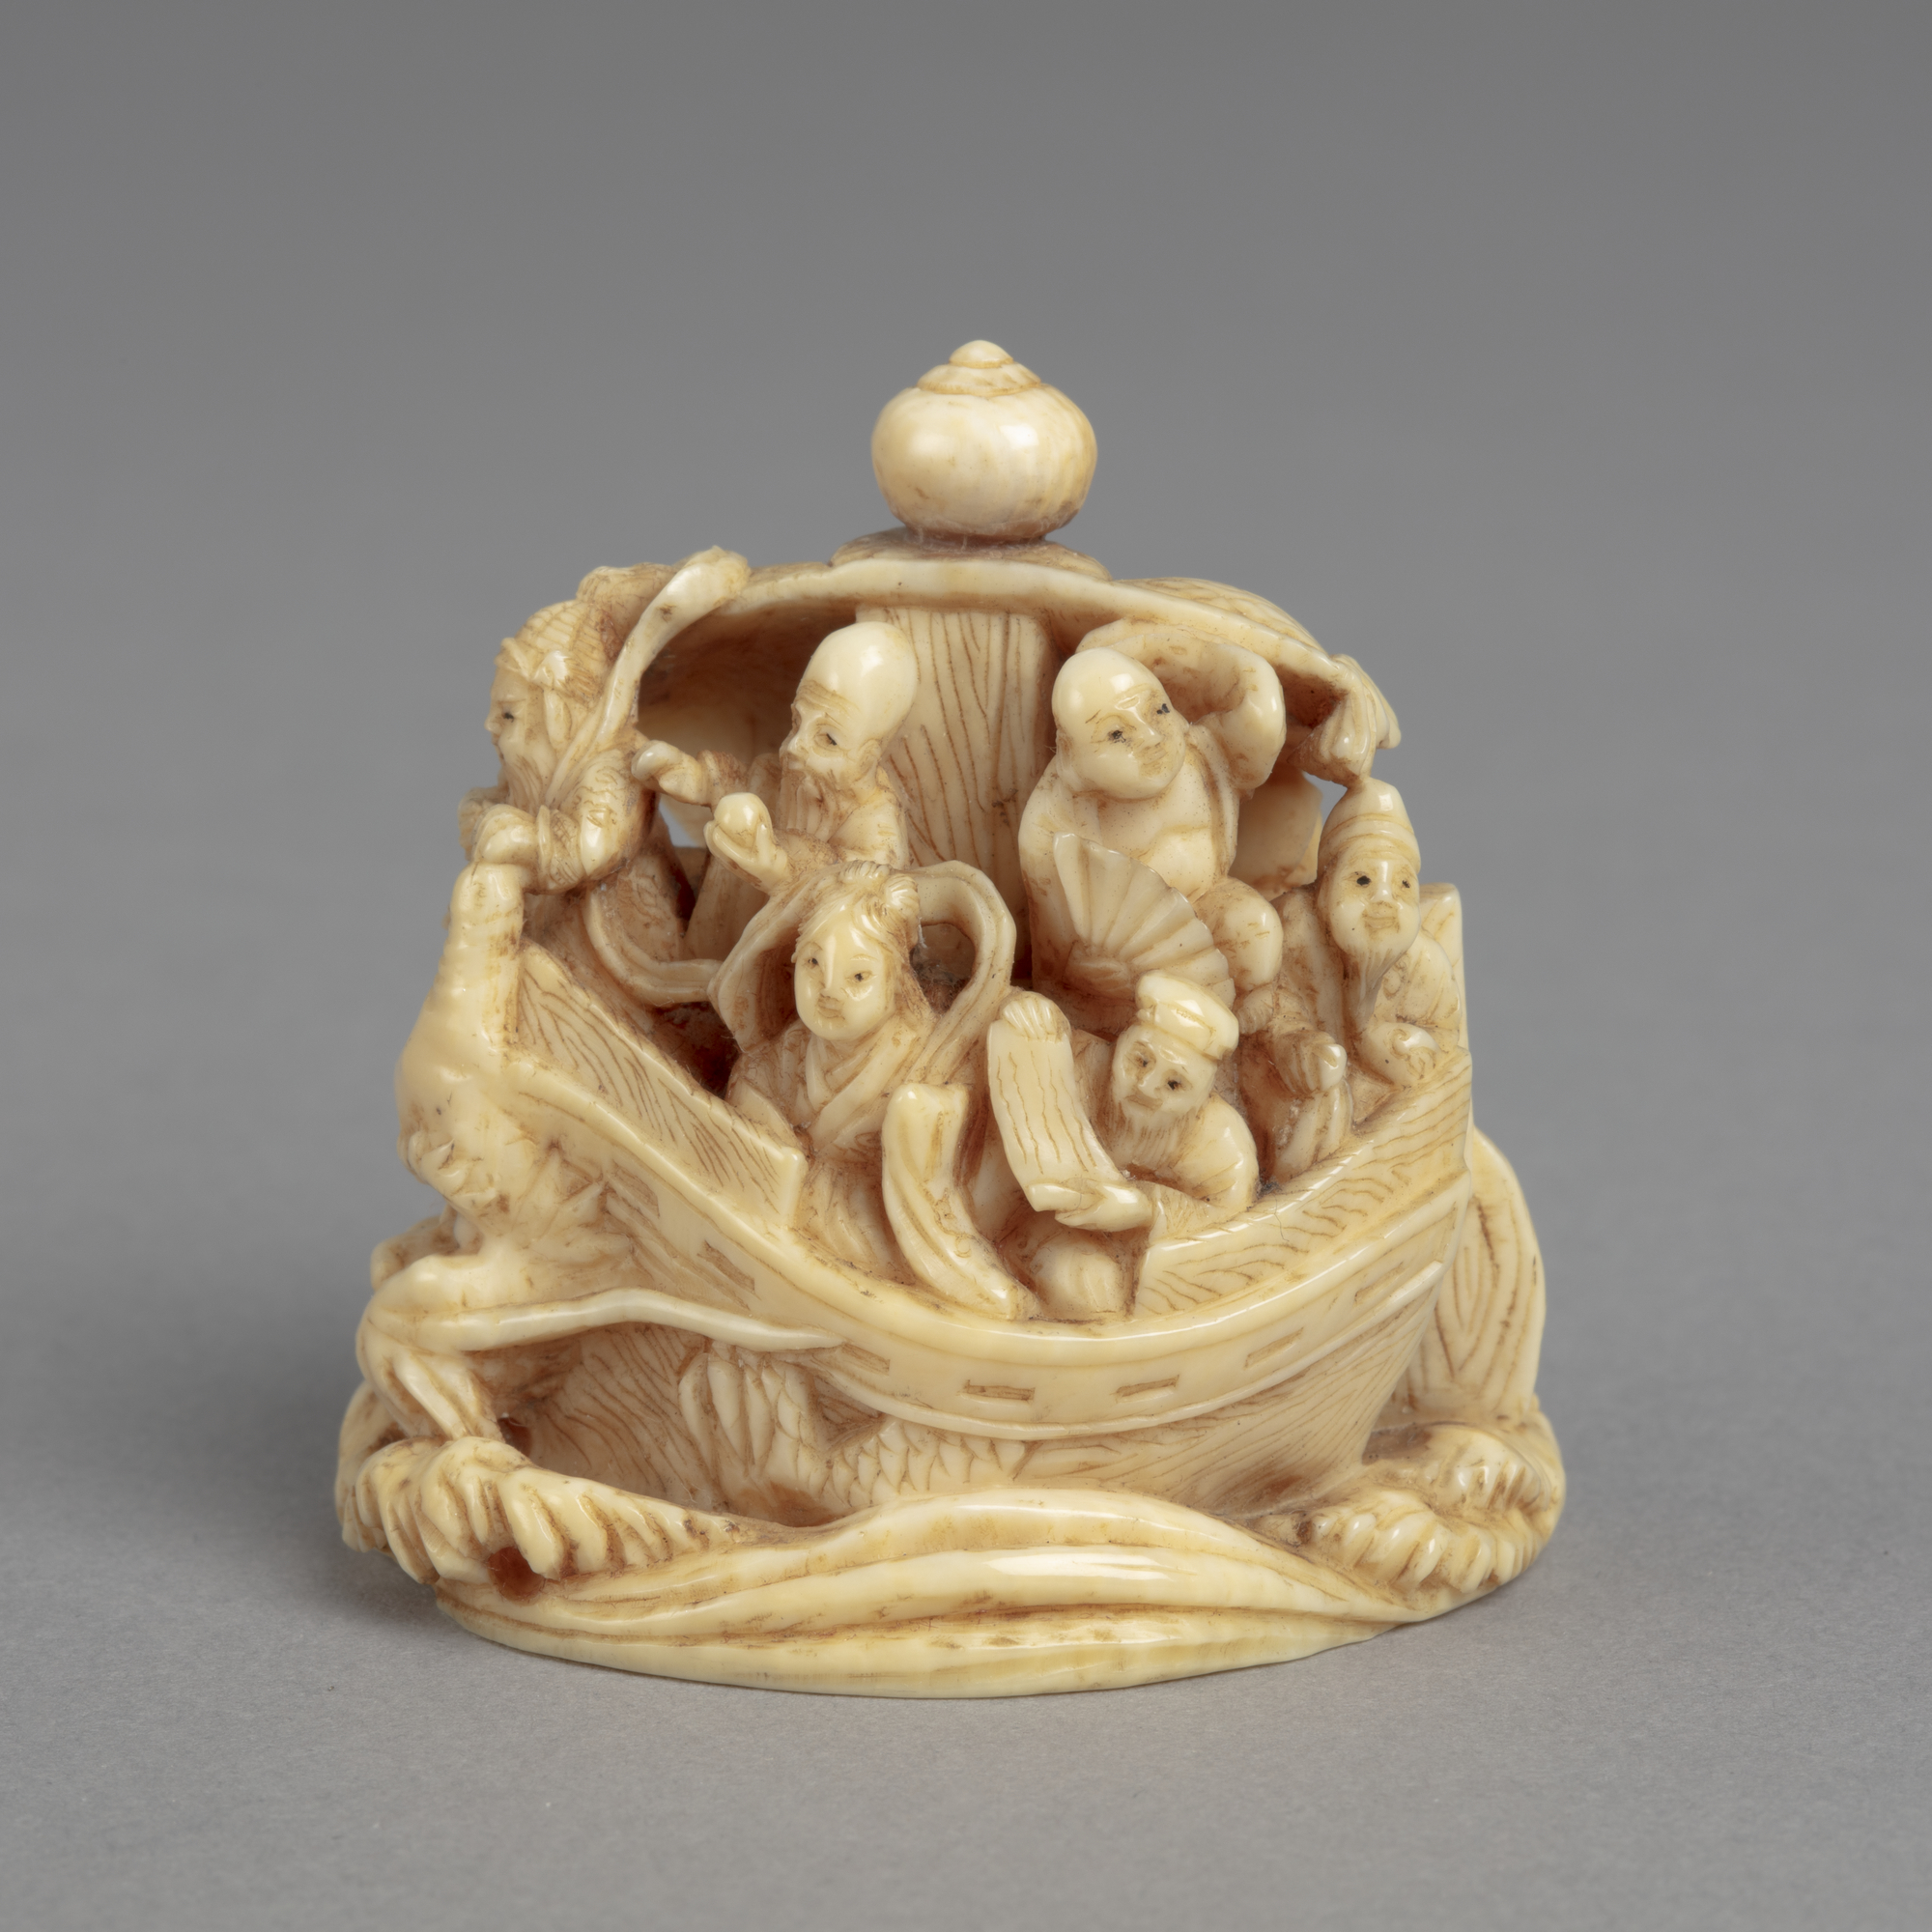 A Japanese ivory okimono ornament of the Seven lucky Gods aboard the Ship of Good Fortune which has the head of a dragon.